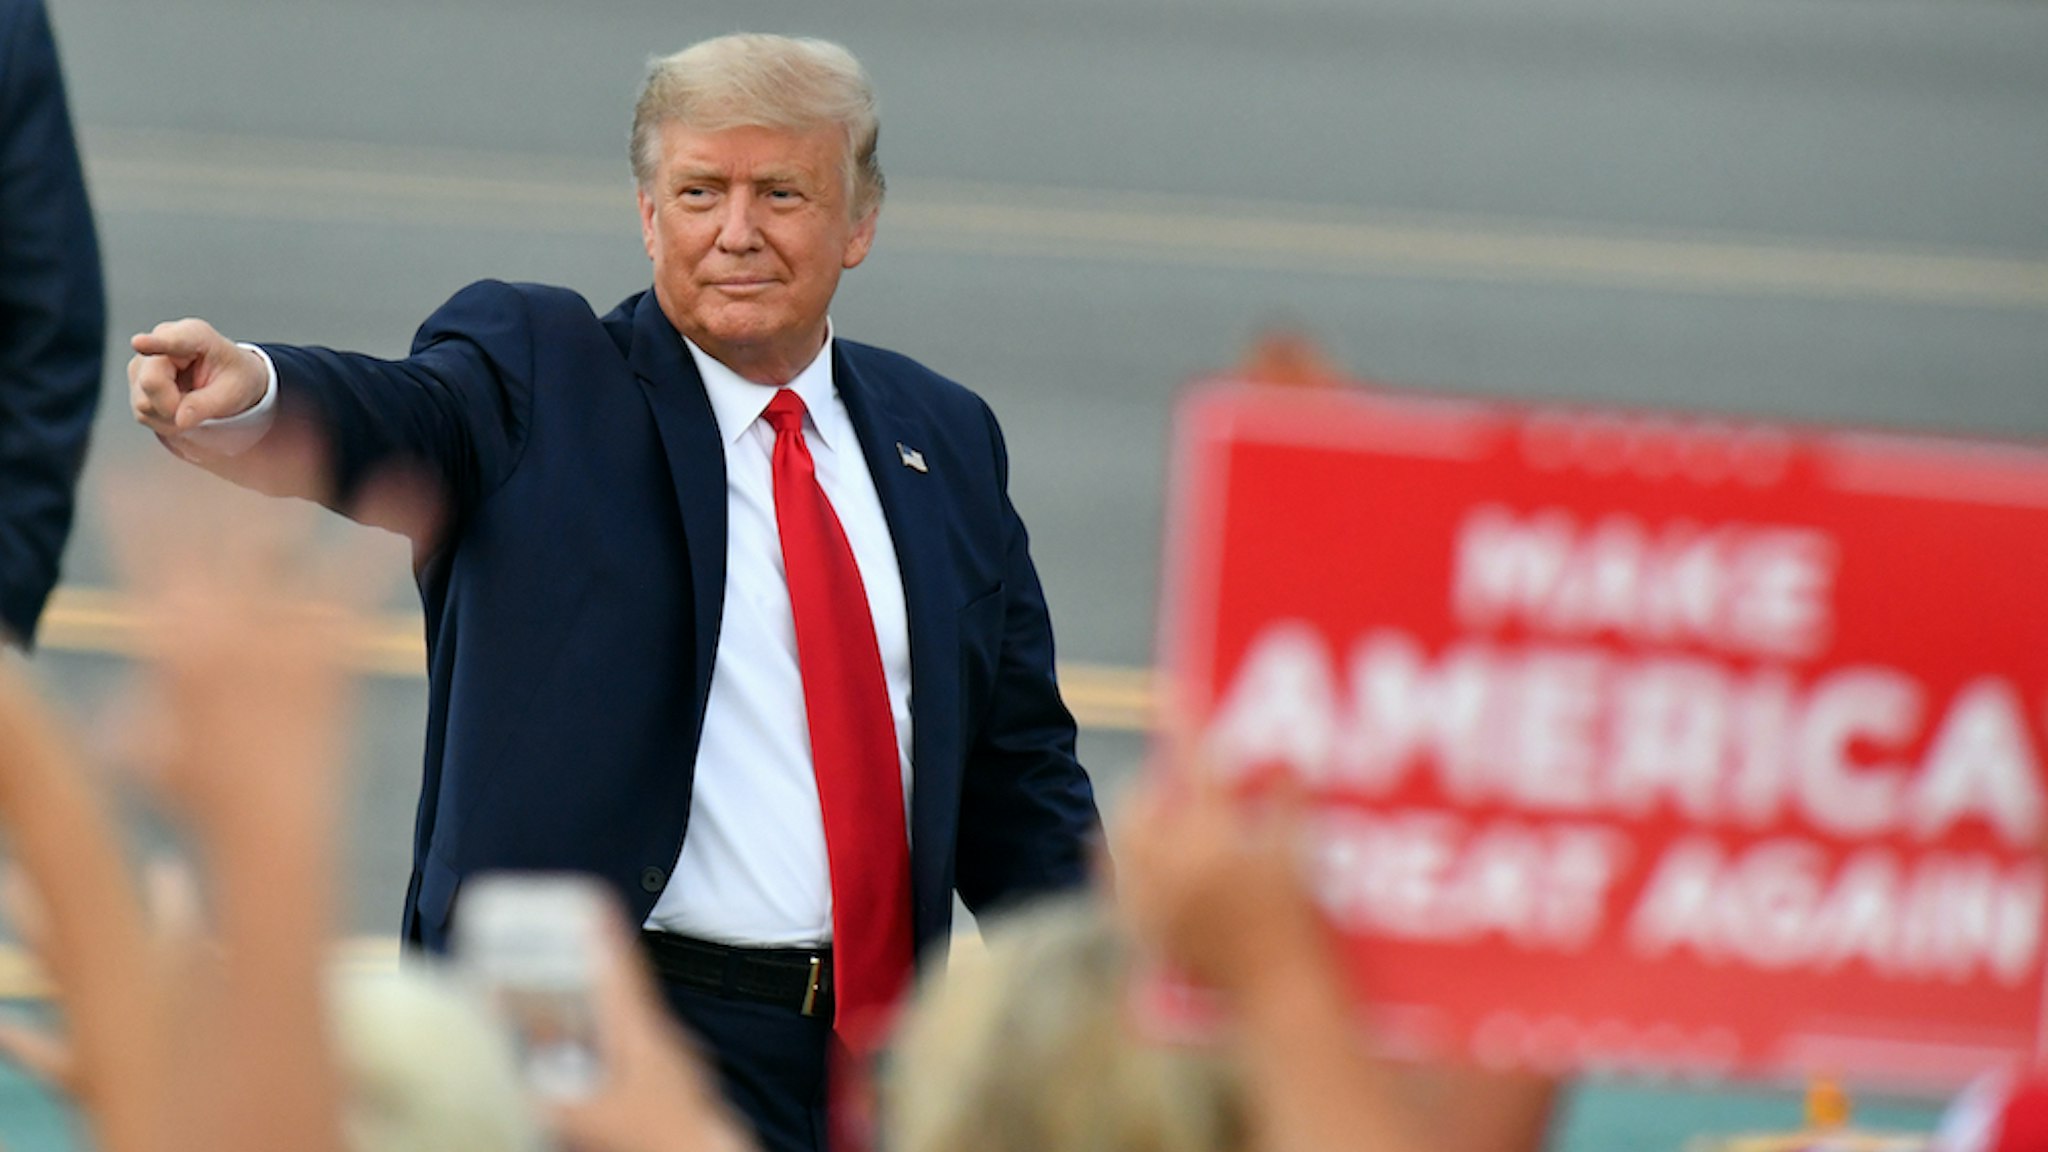 President Trump holds a Make America Great Again campaign rally in Winston-Salem, NC√Ç¬†United States on September 8, 2020 (Photo by Peter Zay/Anadolu Agency via Getty Images)